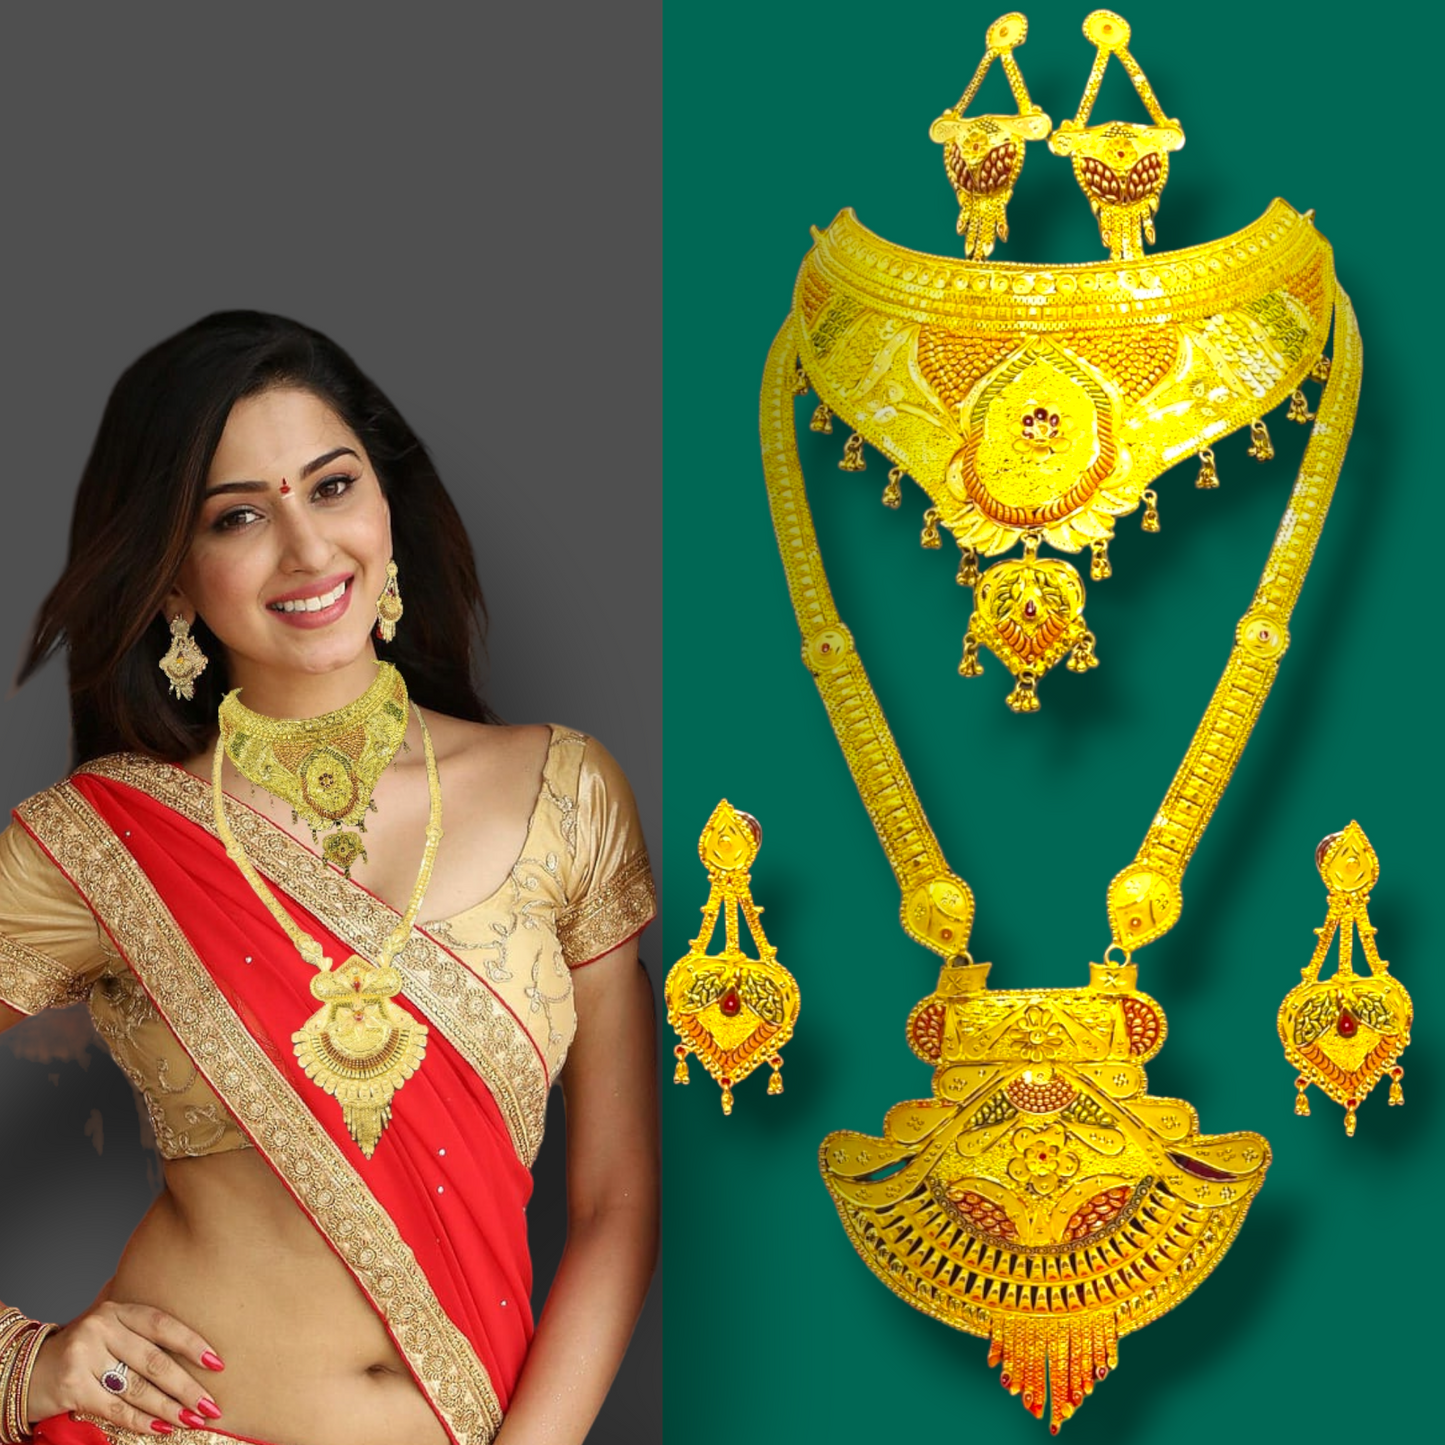 "Graceful Gold-Toned Jewelry Set with Coordinating Earrings"